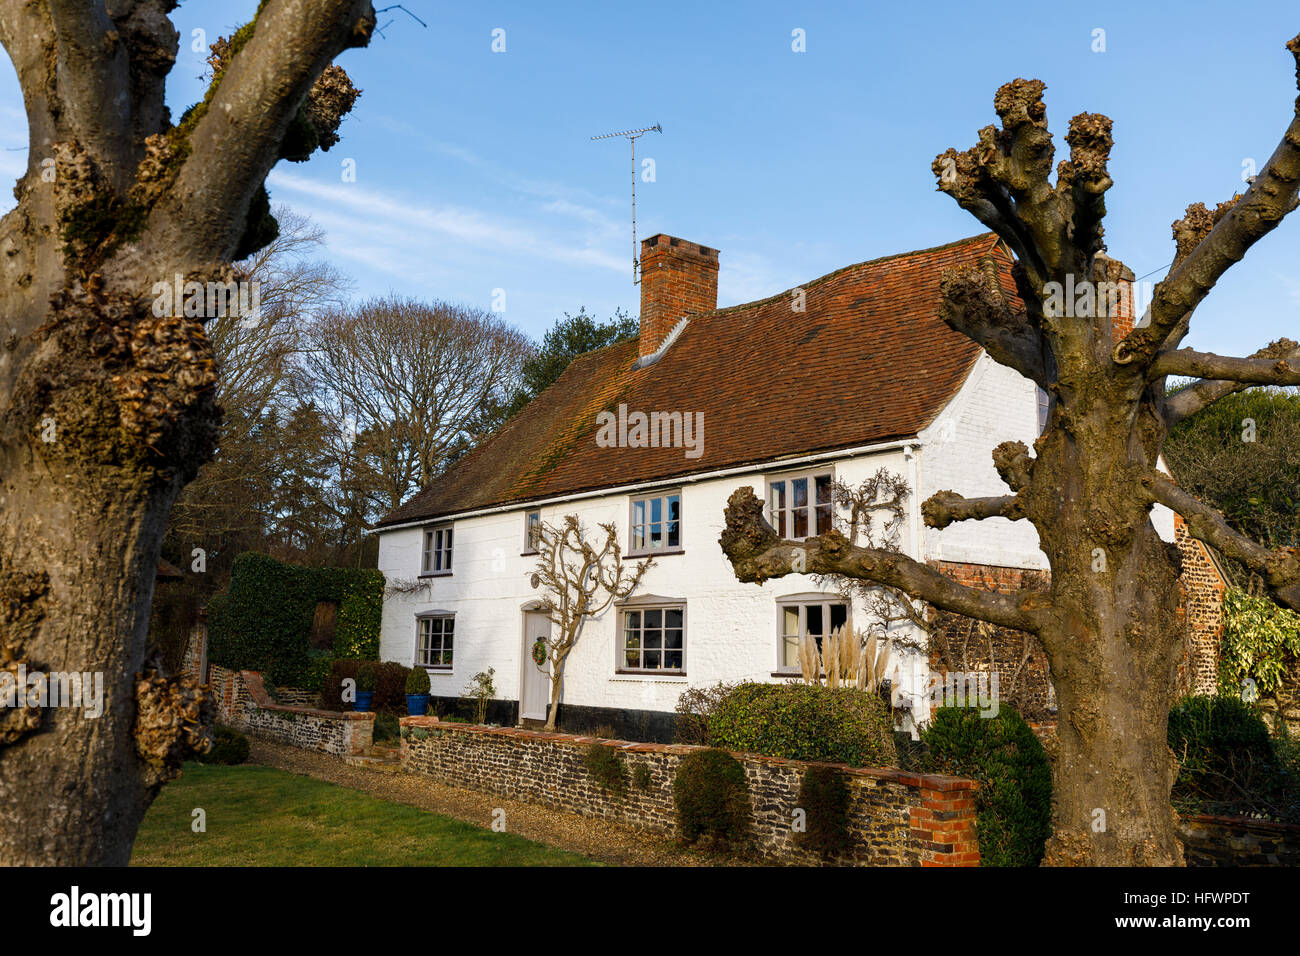 Large whitewashed country cottage in Tilford, a village near Farnham, Surrey, UK, with pollarded lime trees Stock Photo